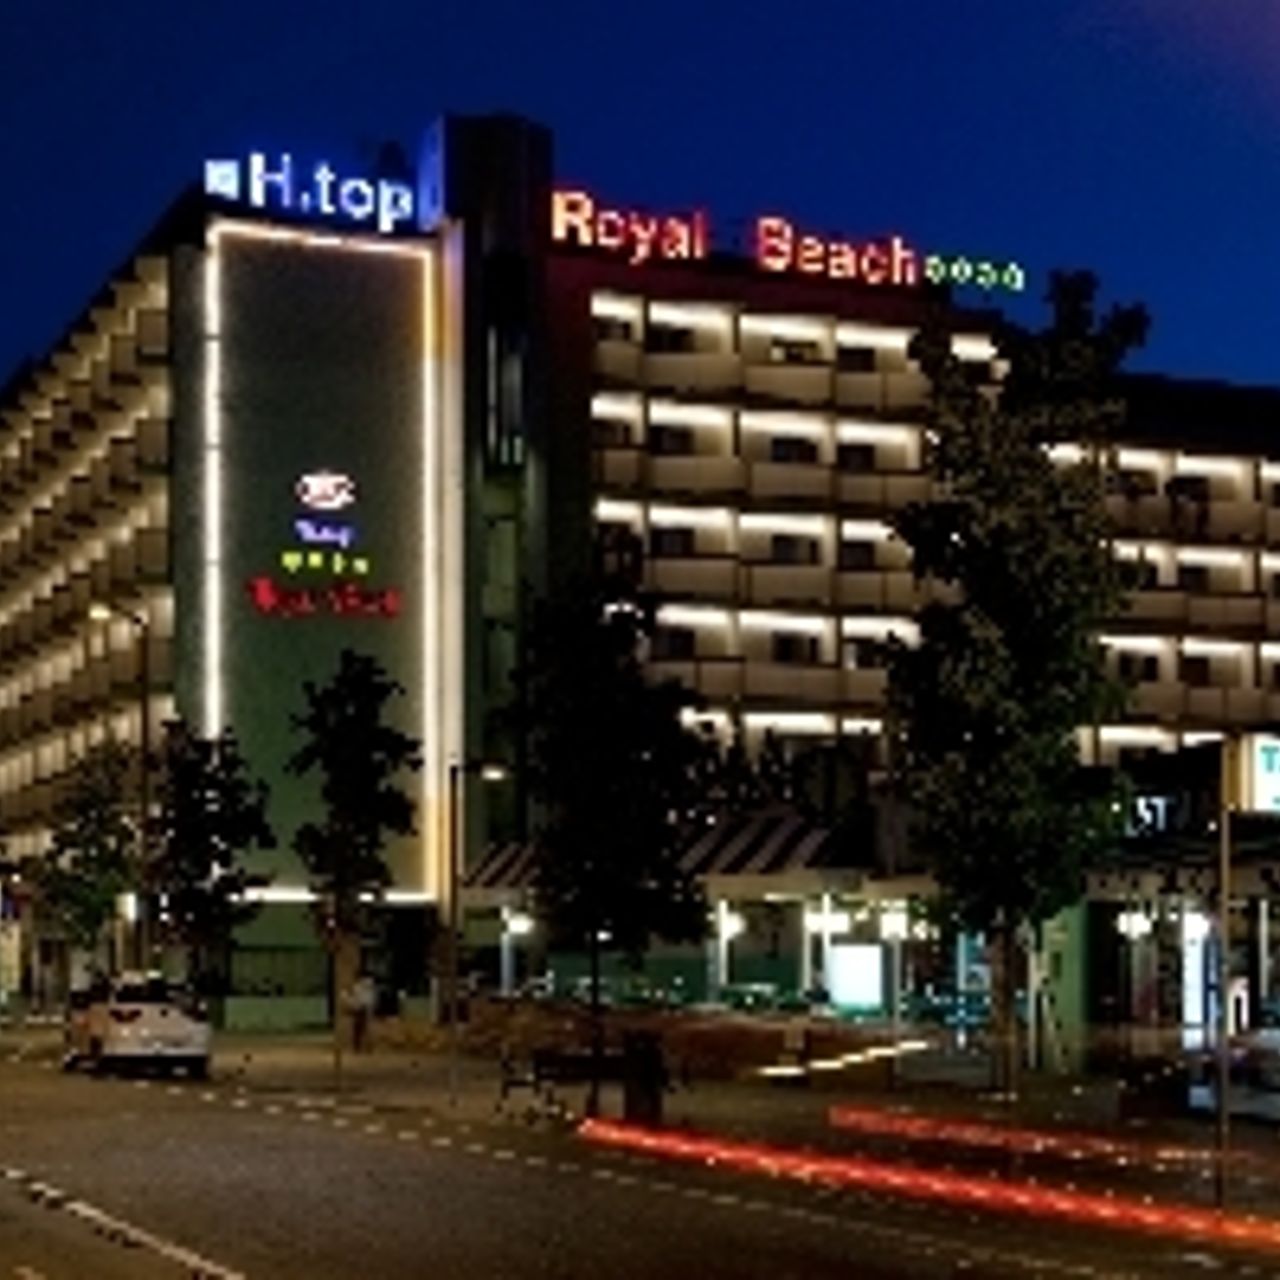 Hotel H TOP Royal Beach - Lloret de Mar - Great prices at HOTEL INFO